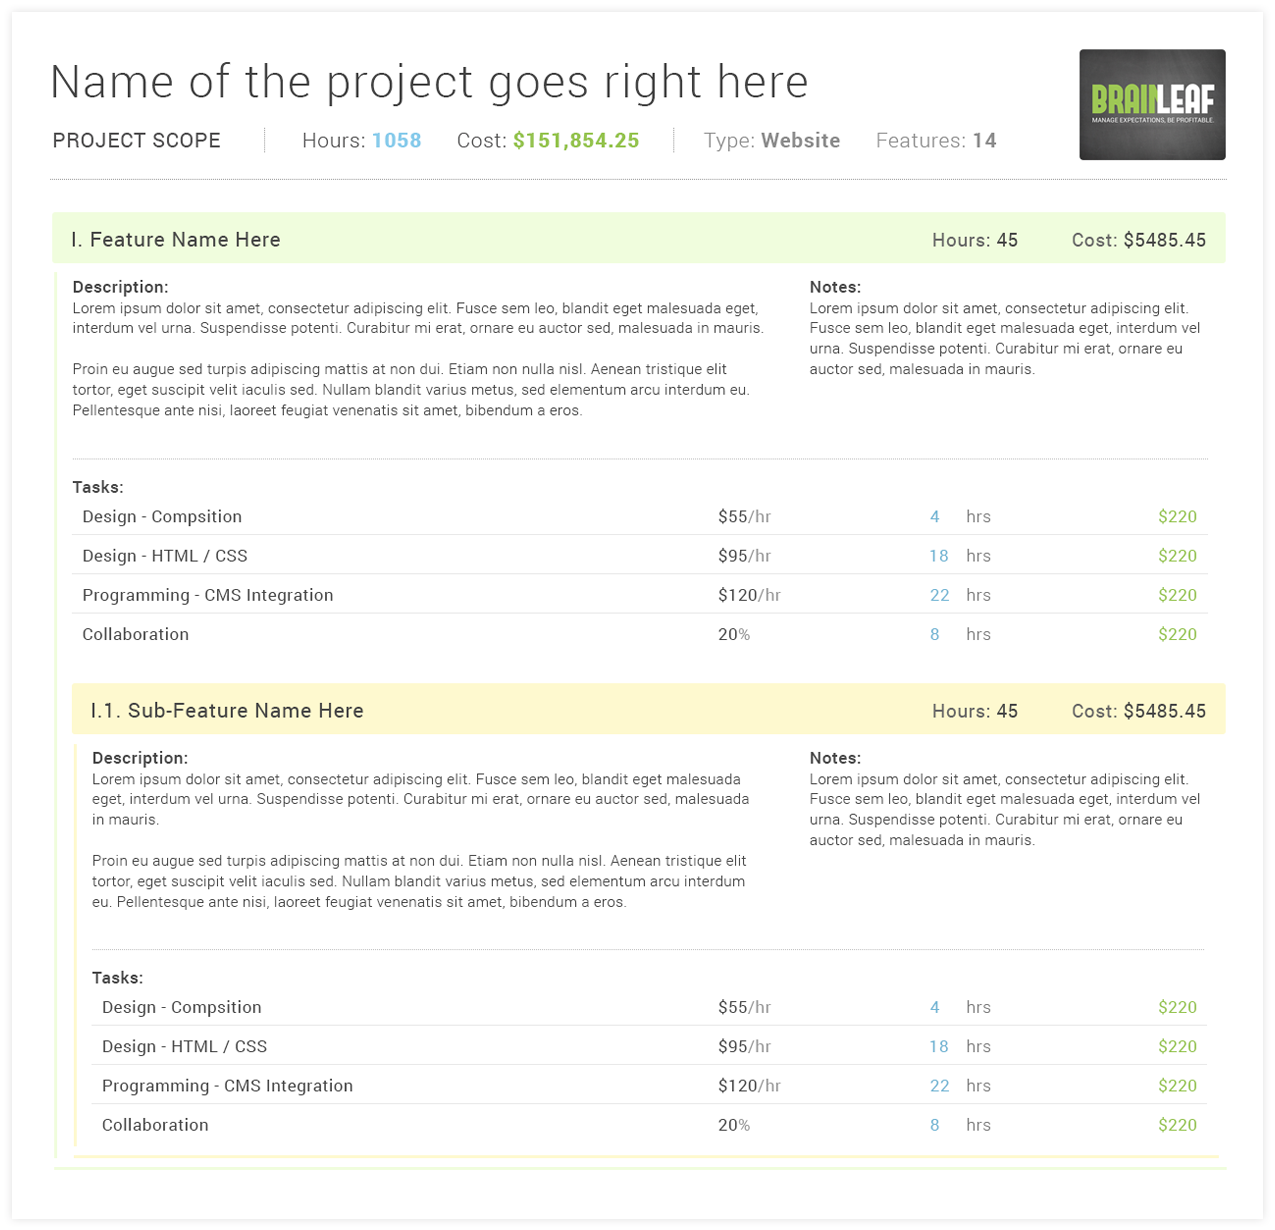 Project Scope Document